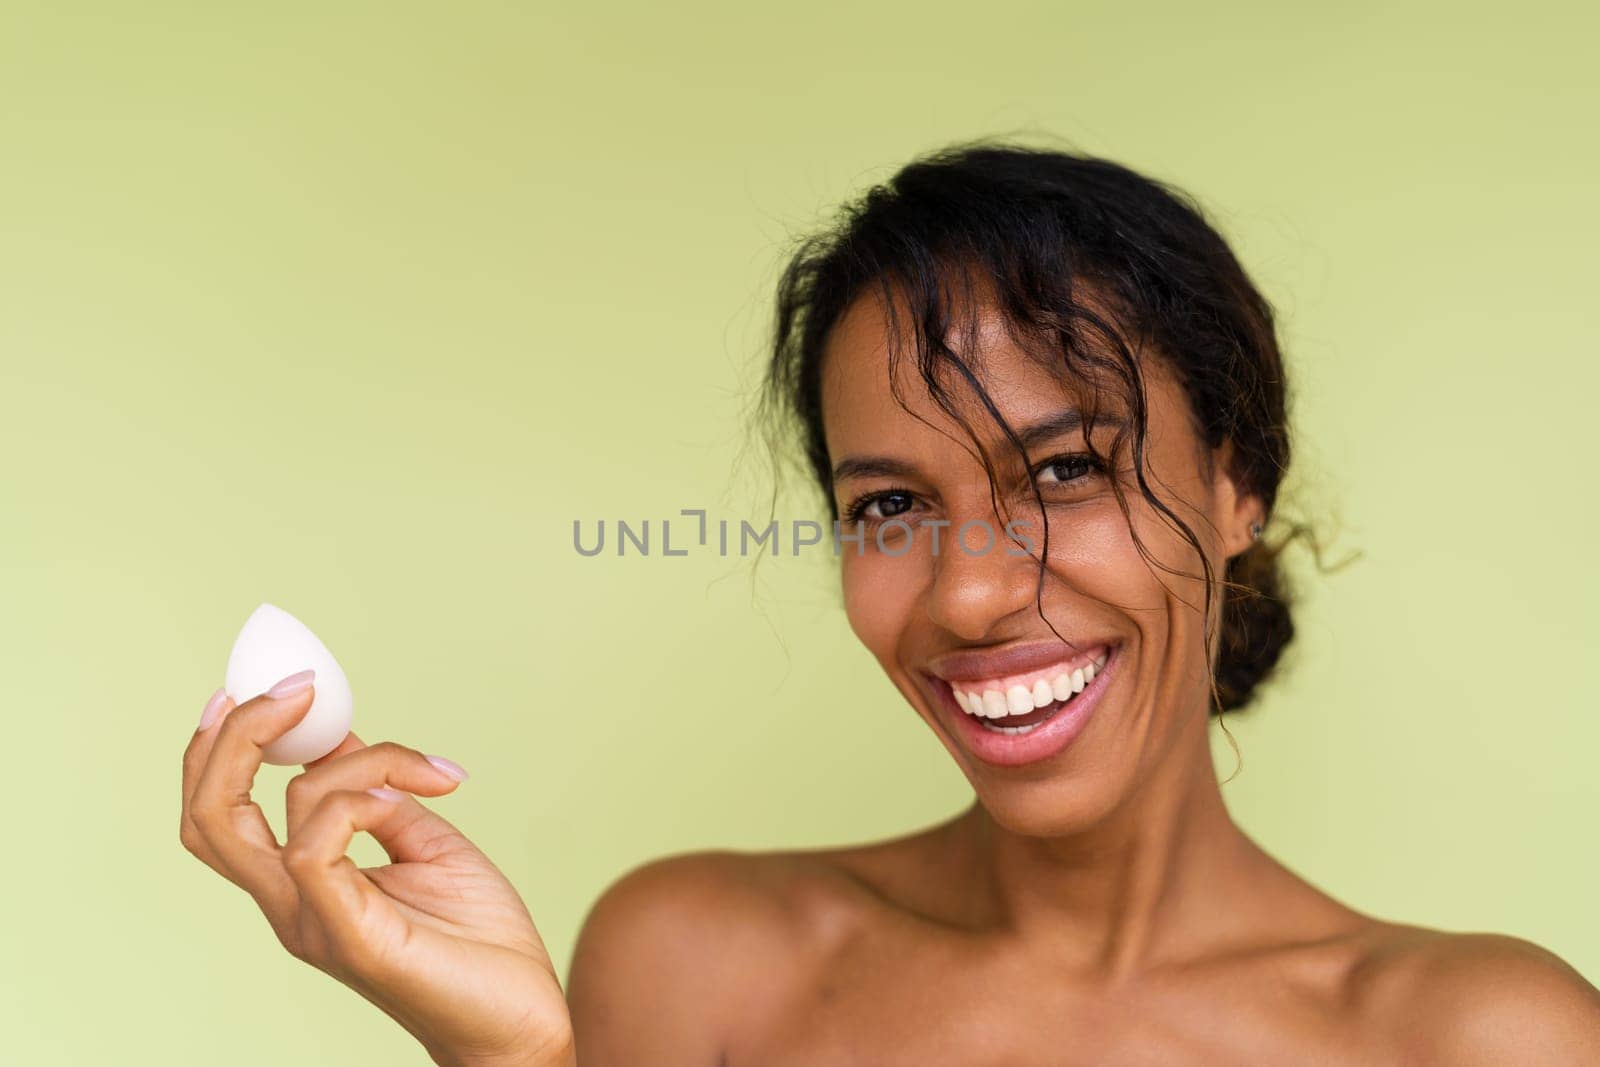 Beauty portrait of young topless african american woman with bare shoulders on green background with makeup foundation sponge